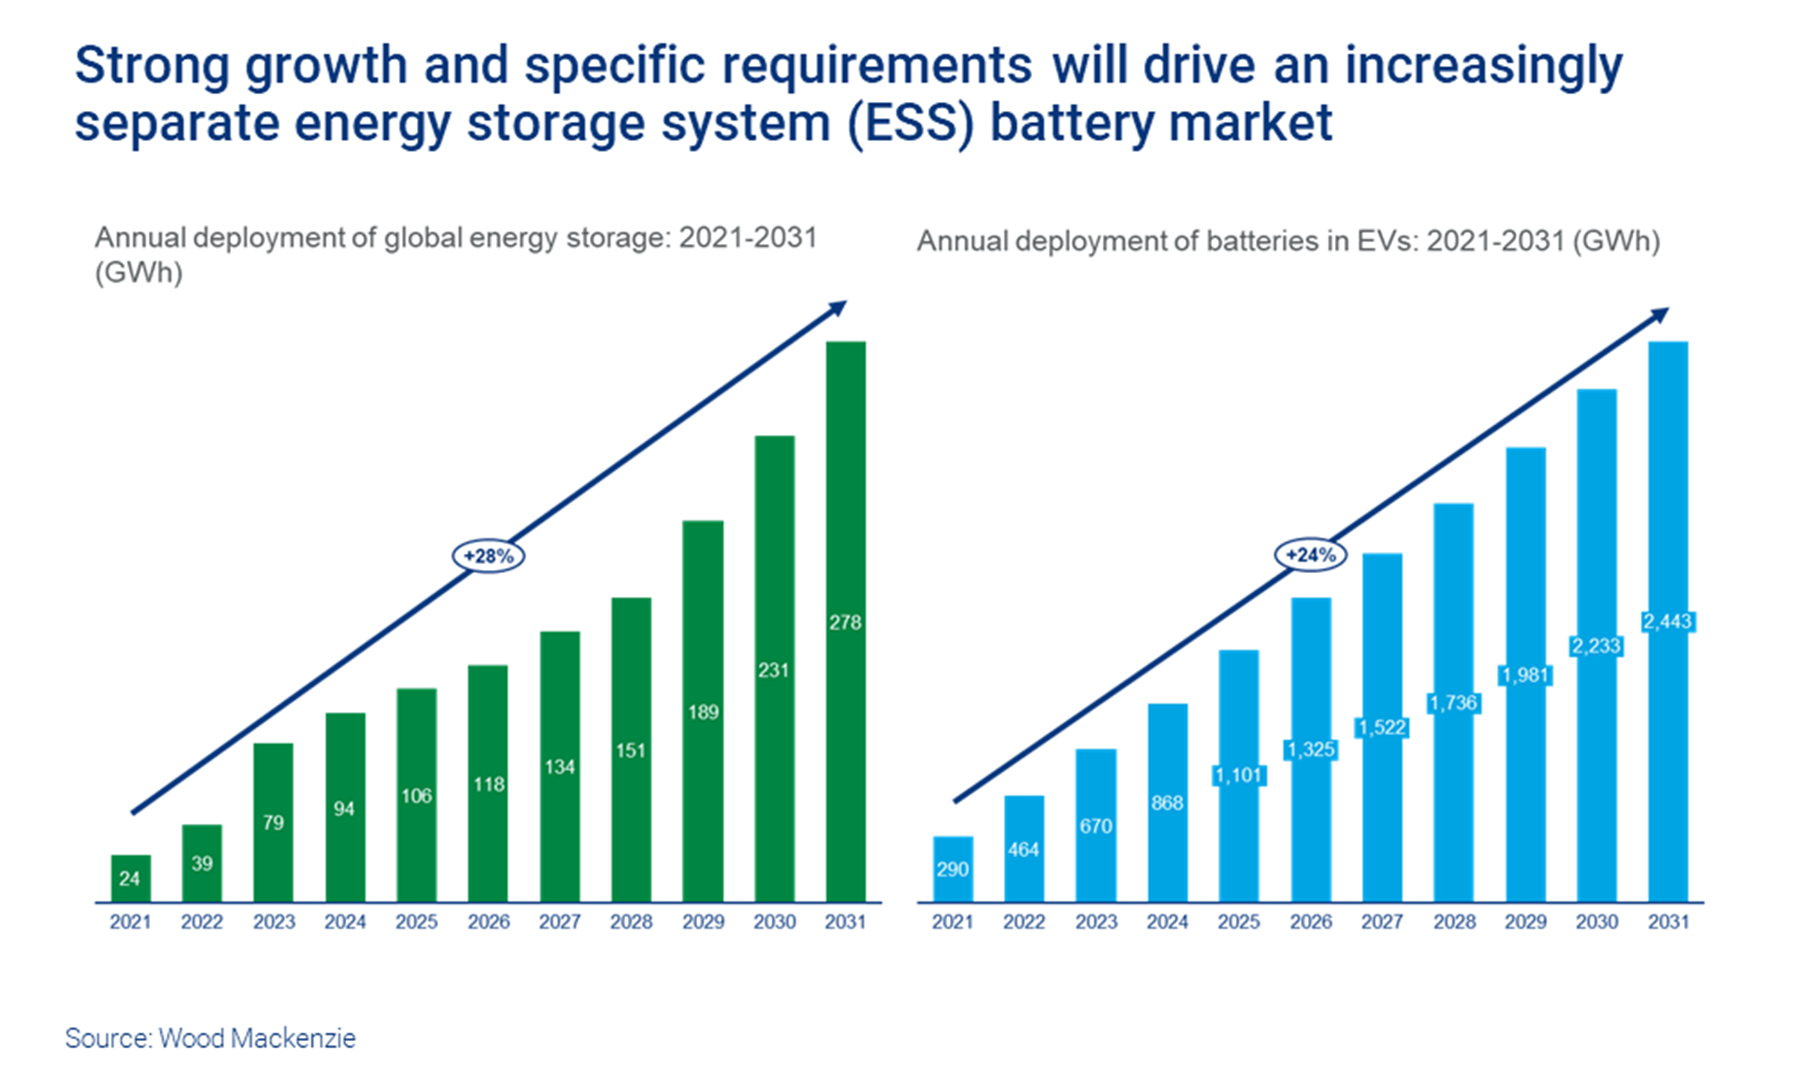 https://www.woodmac.com/siteassets/article-images/2023/q1/q2/annual-deployment-of-global-energy-storage-and-batteries---chart.png?width=1800&height=0&mode=crop&center=0.5,0.5